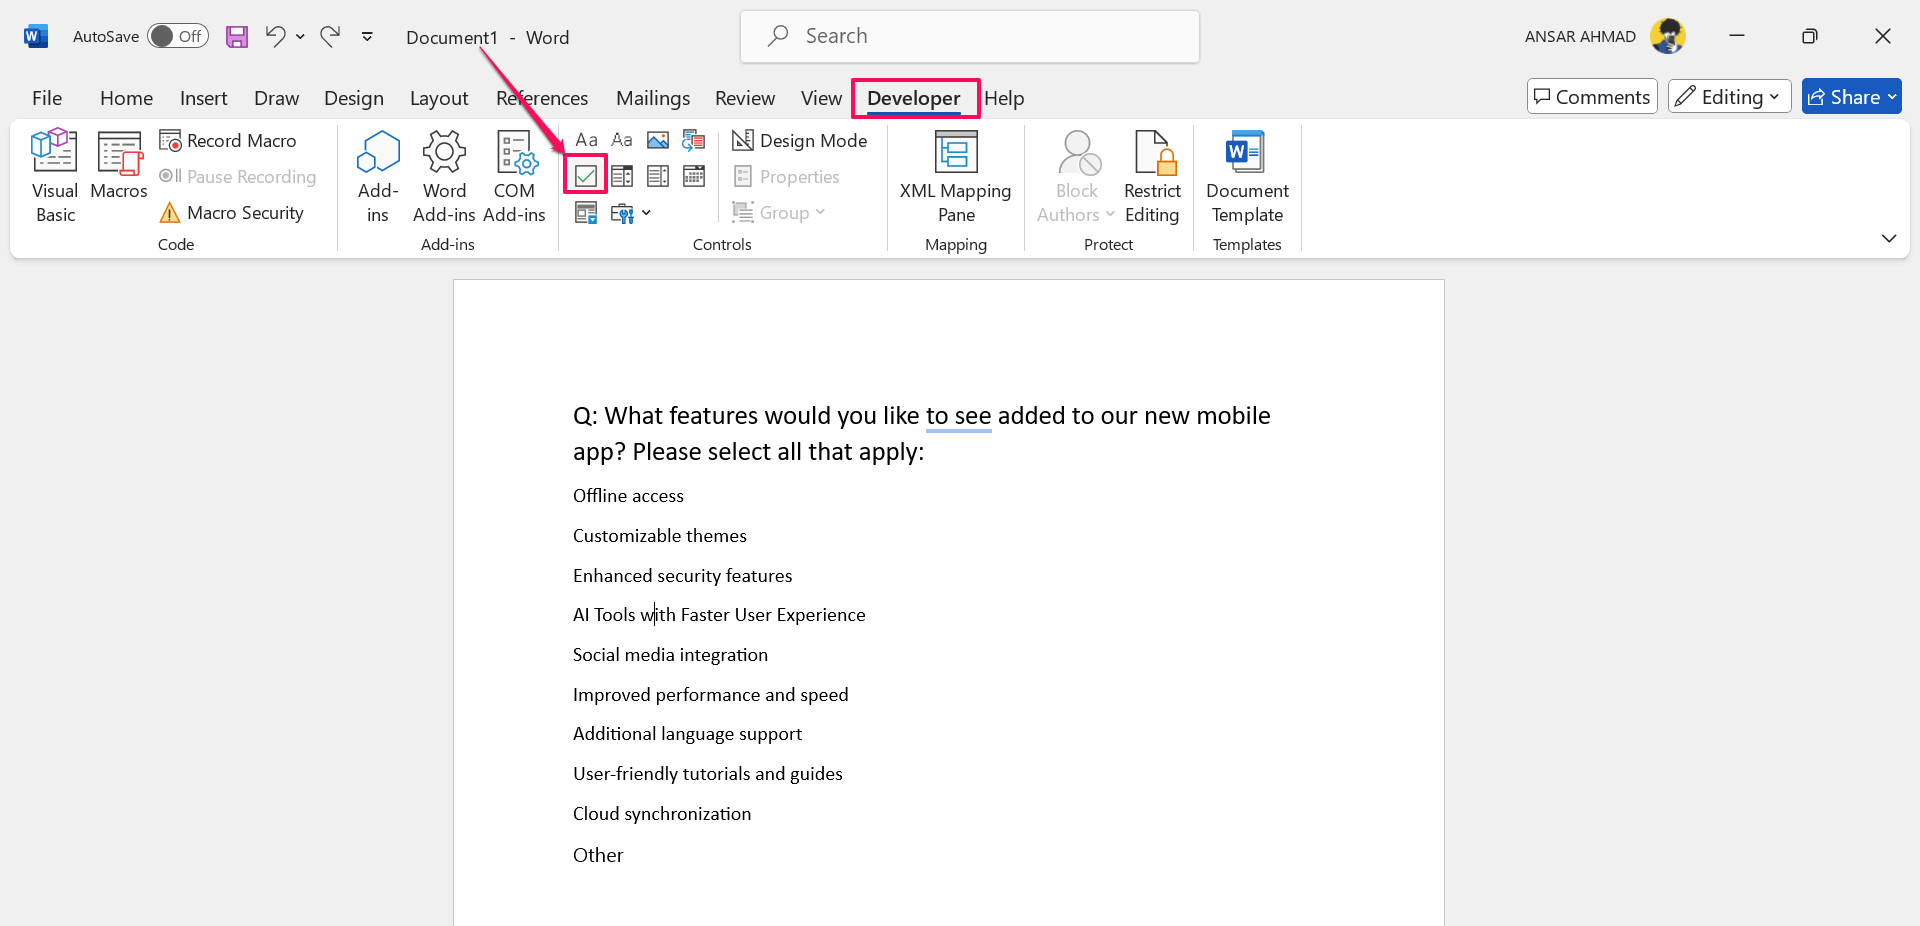 Click on the Checkbox icon to add checkboxes